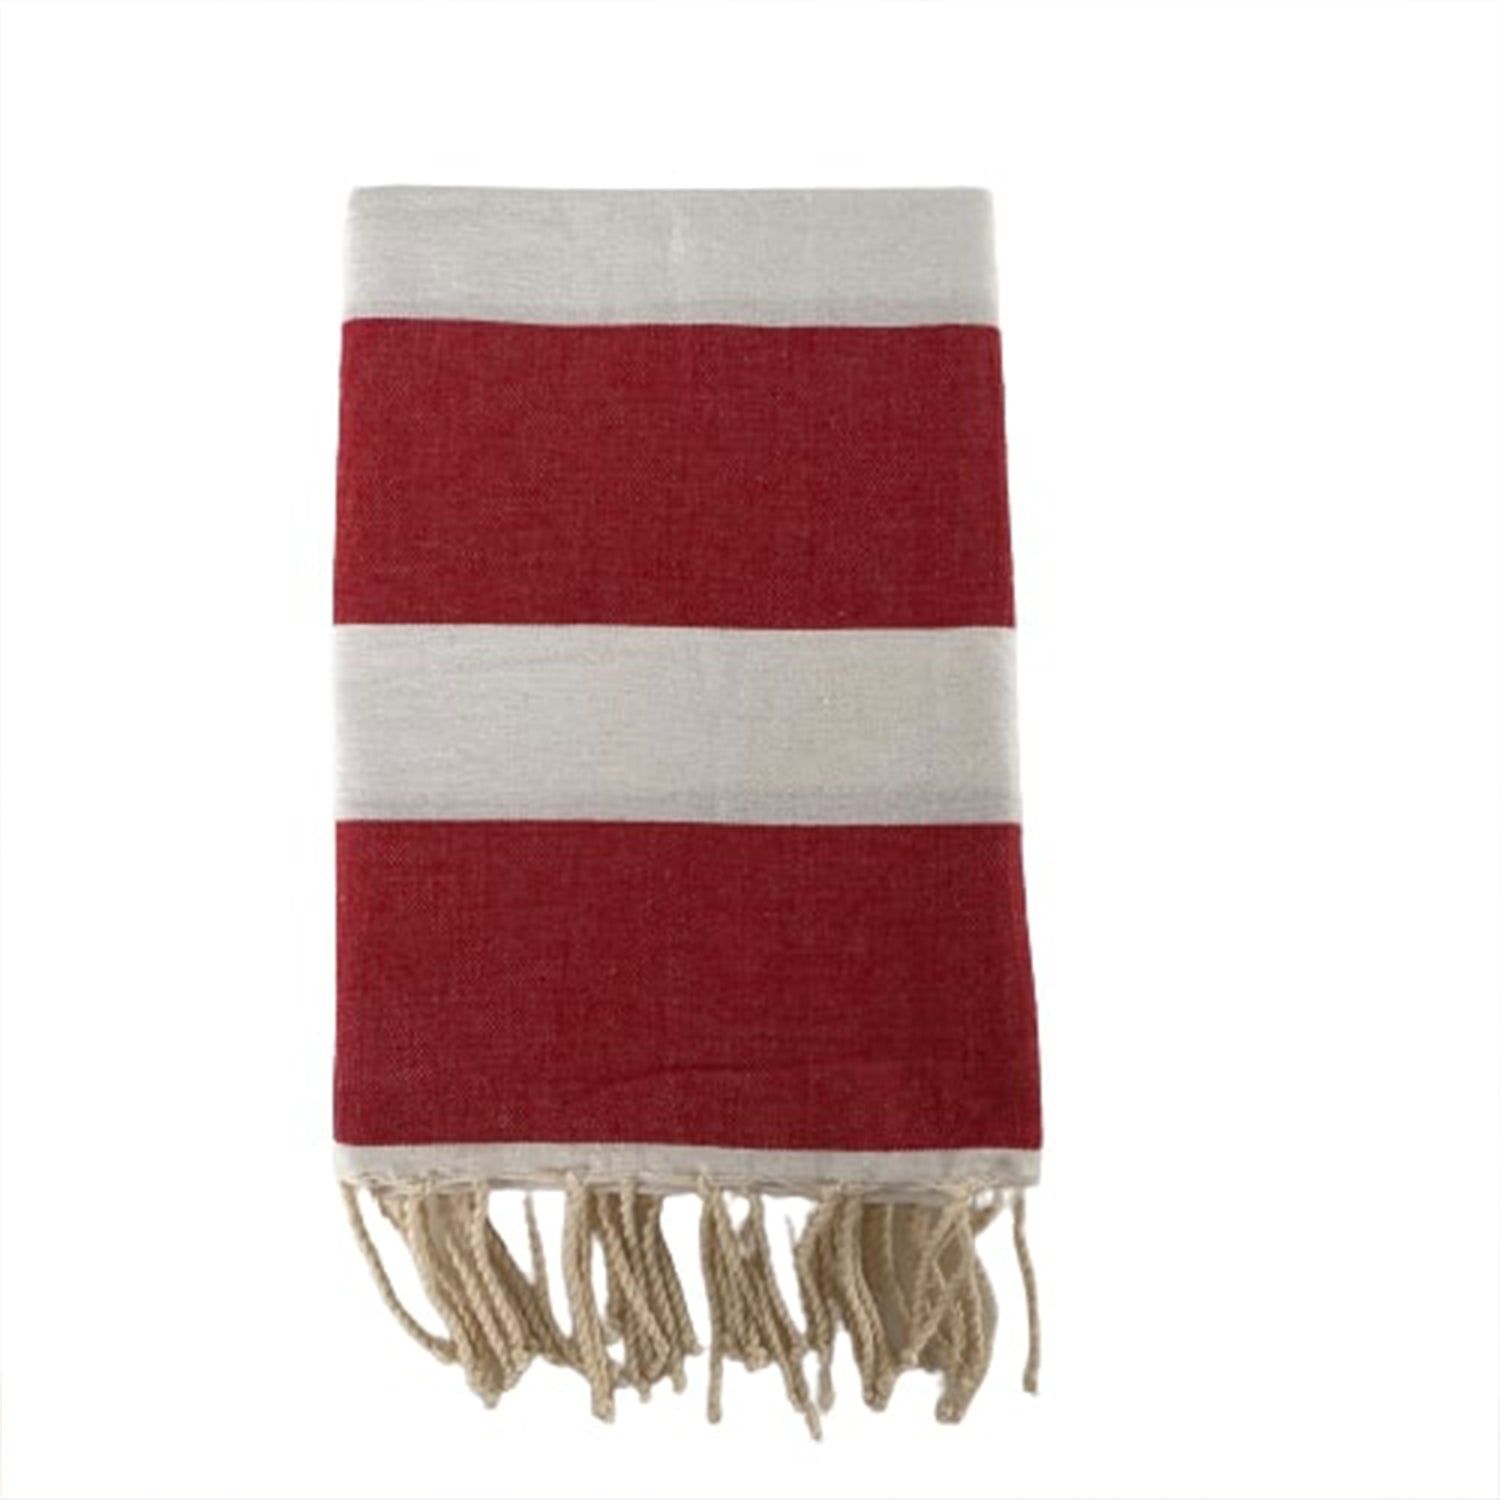 Fouta traditionnelle Melissa Grey 200x200 190g/m²